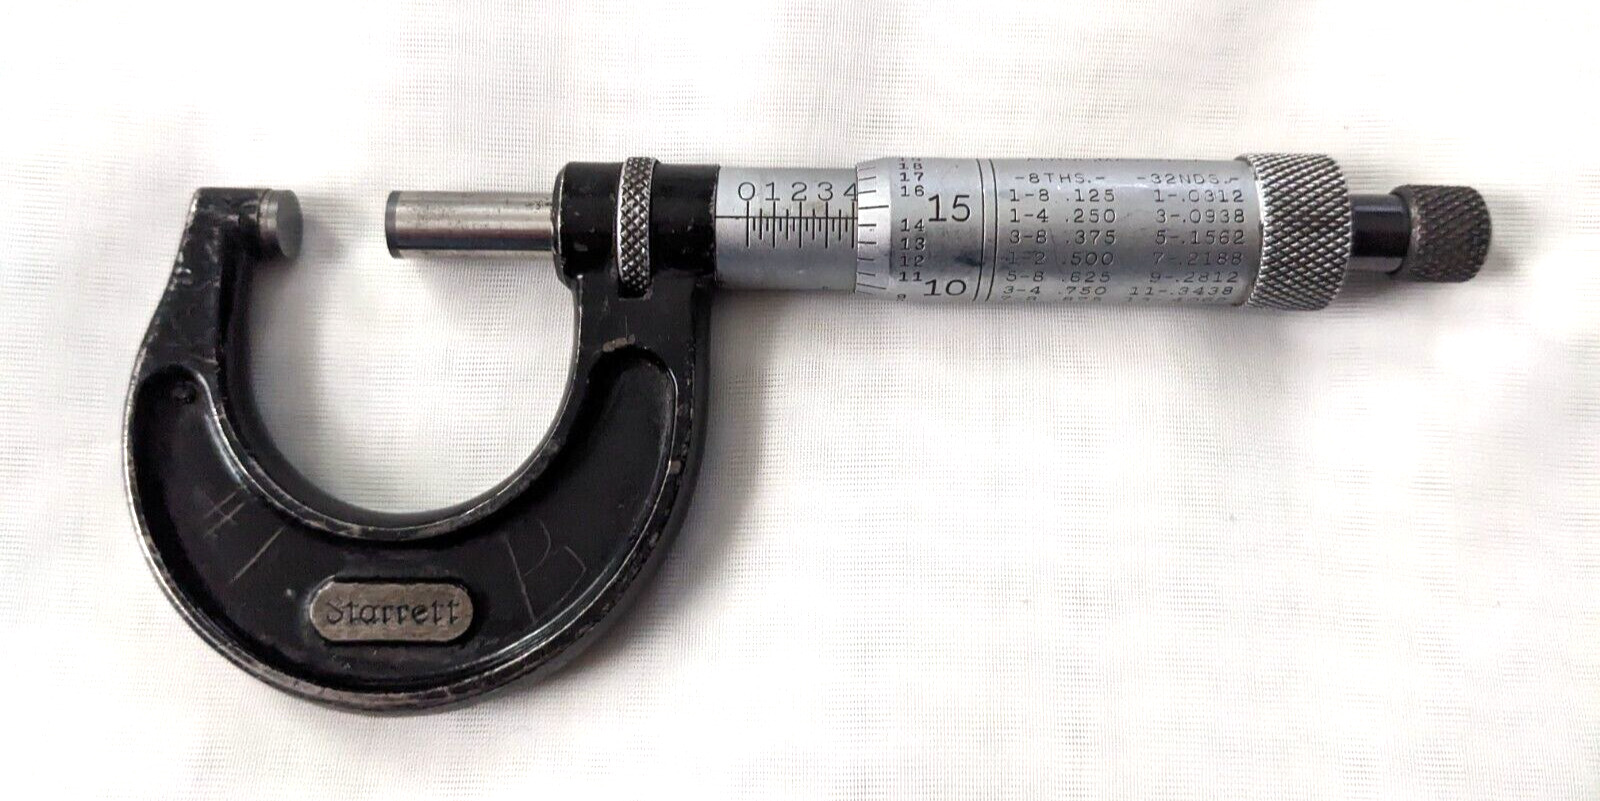 Vintage Preowned Starrett Outside Vernier Micrometer #436-1 in. Made U.S.A.